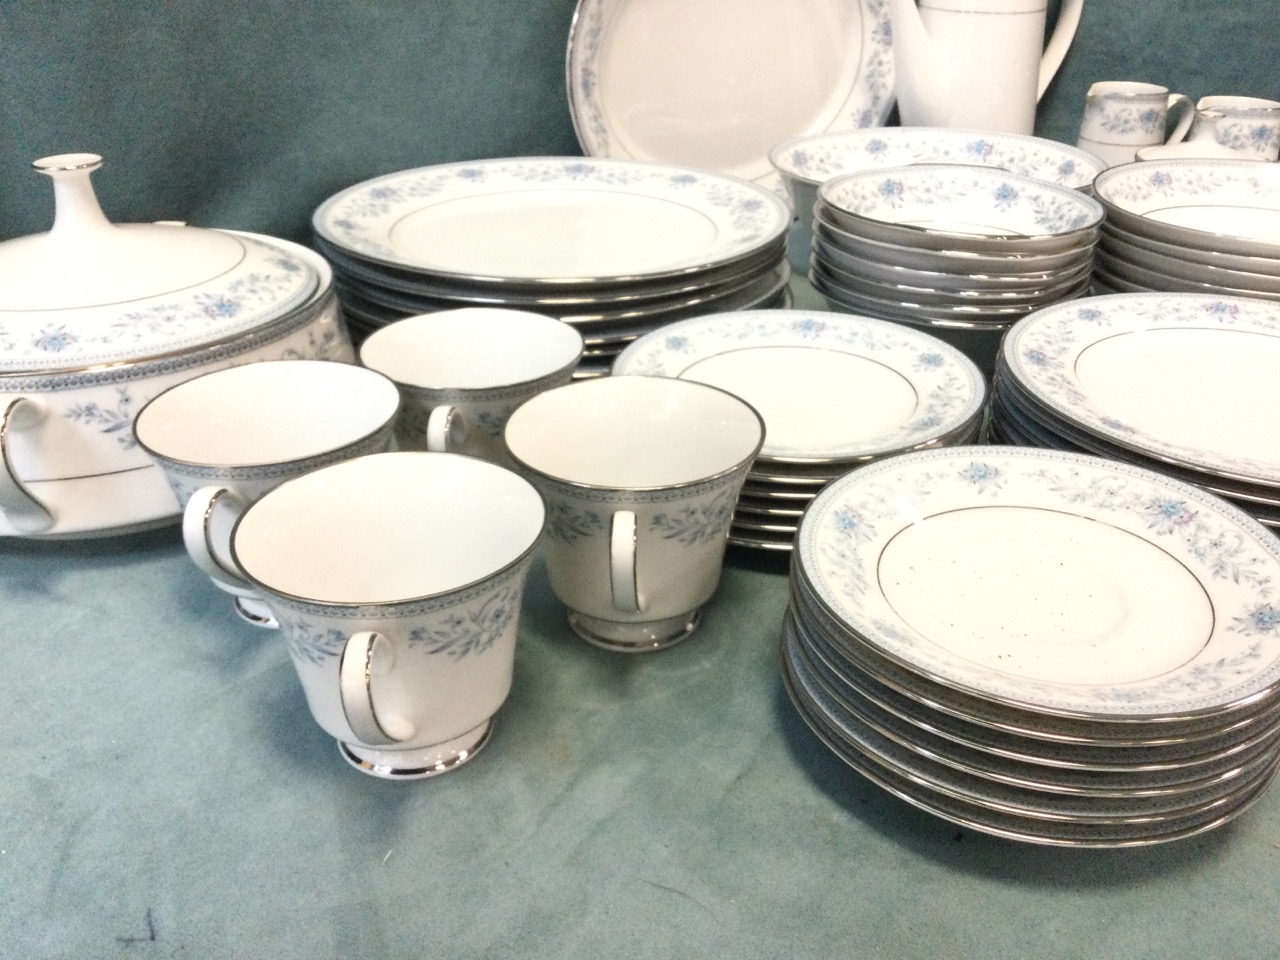 An extensive Noritake porcelain dinner service in the Blue Hill pattern with a covered tureen, an - Image 3 of 3